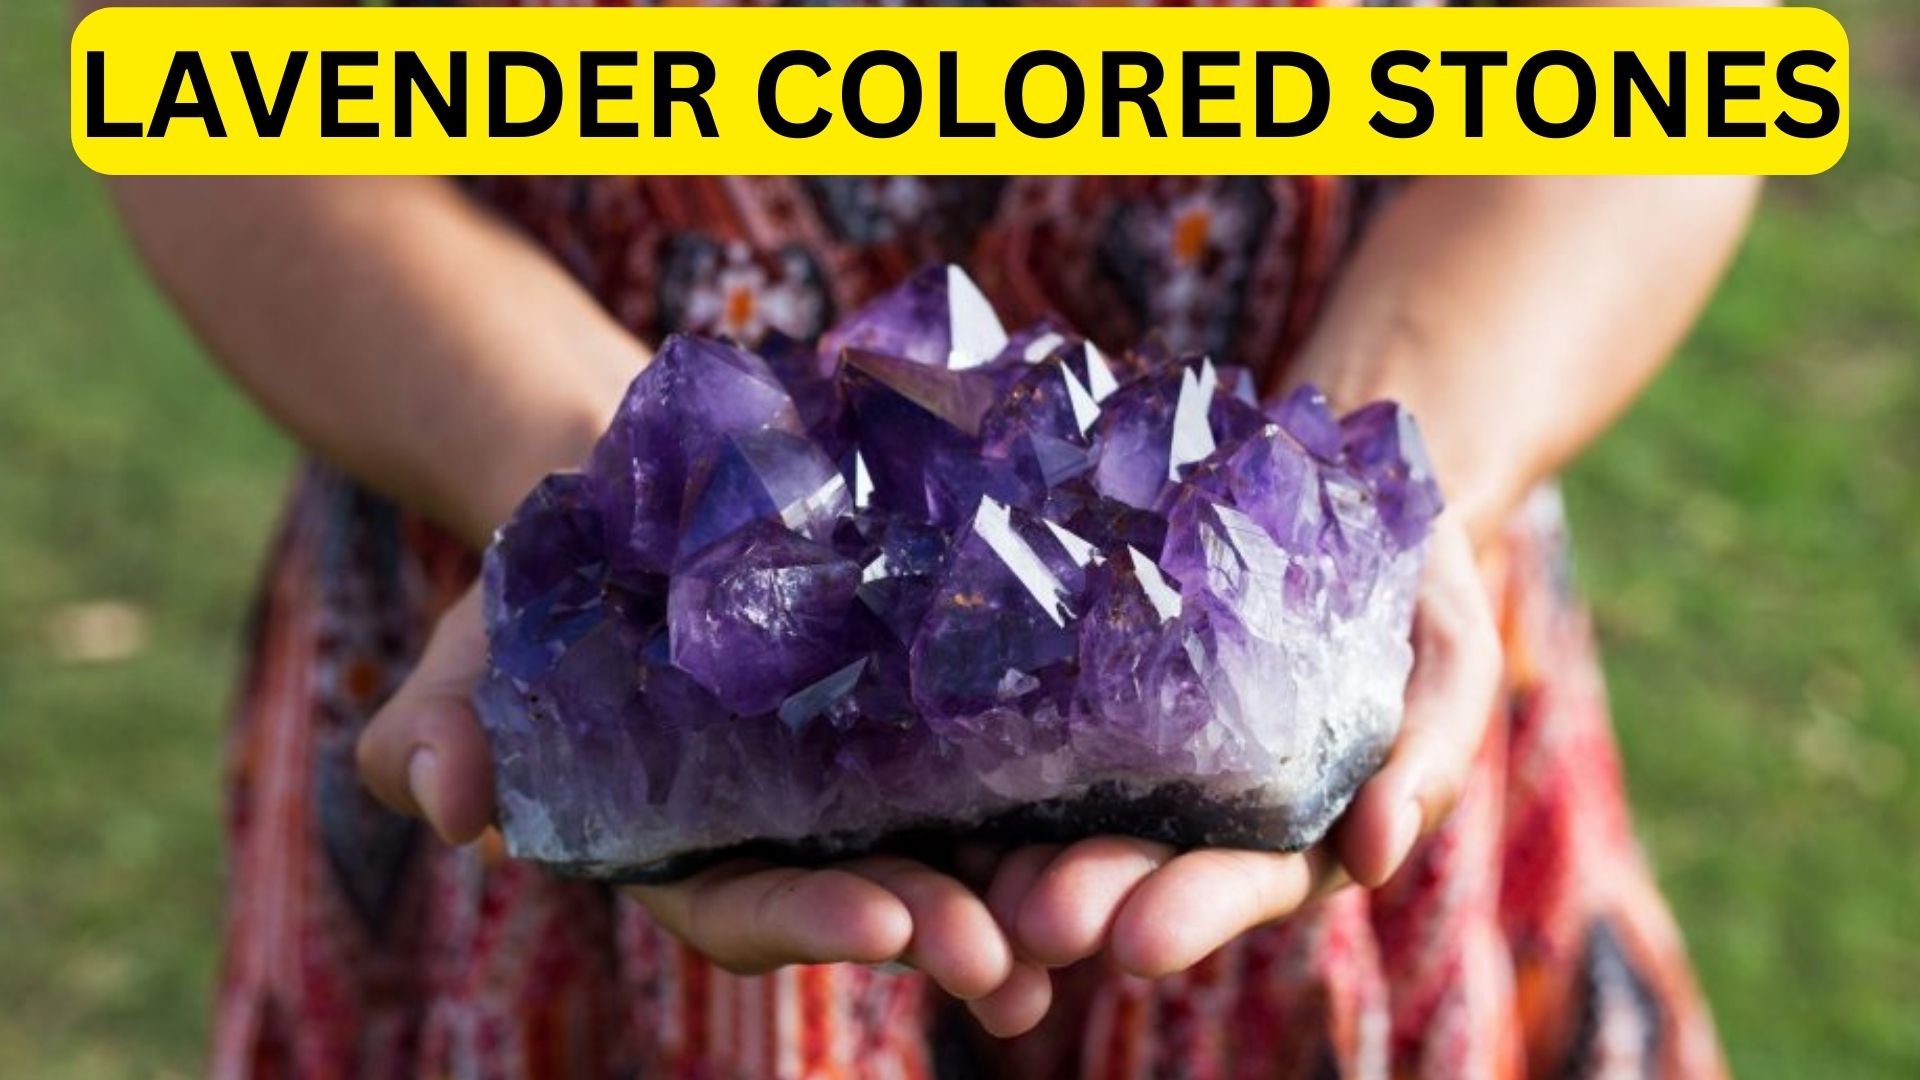 Lavender Colored Stones - Gemstones To Perfect Your Look